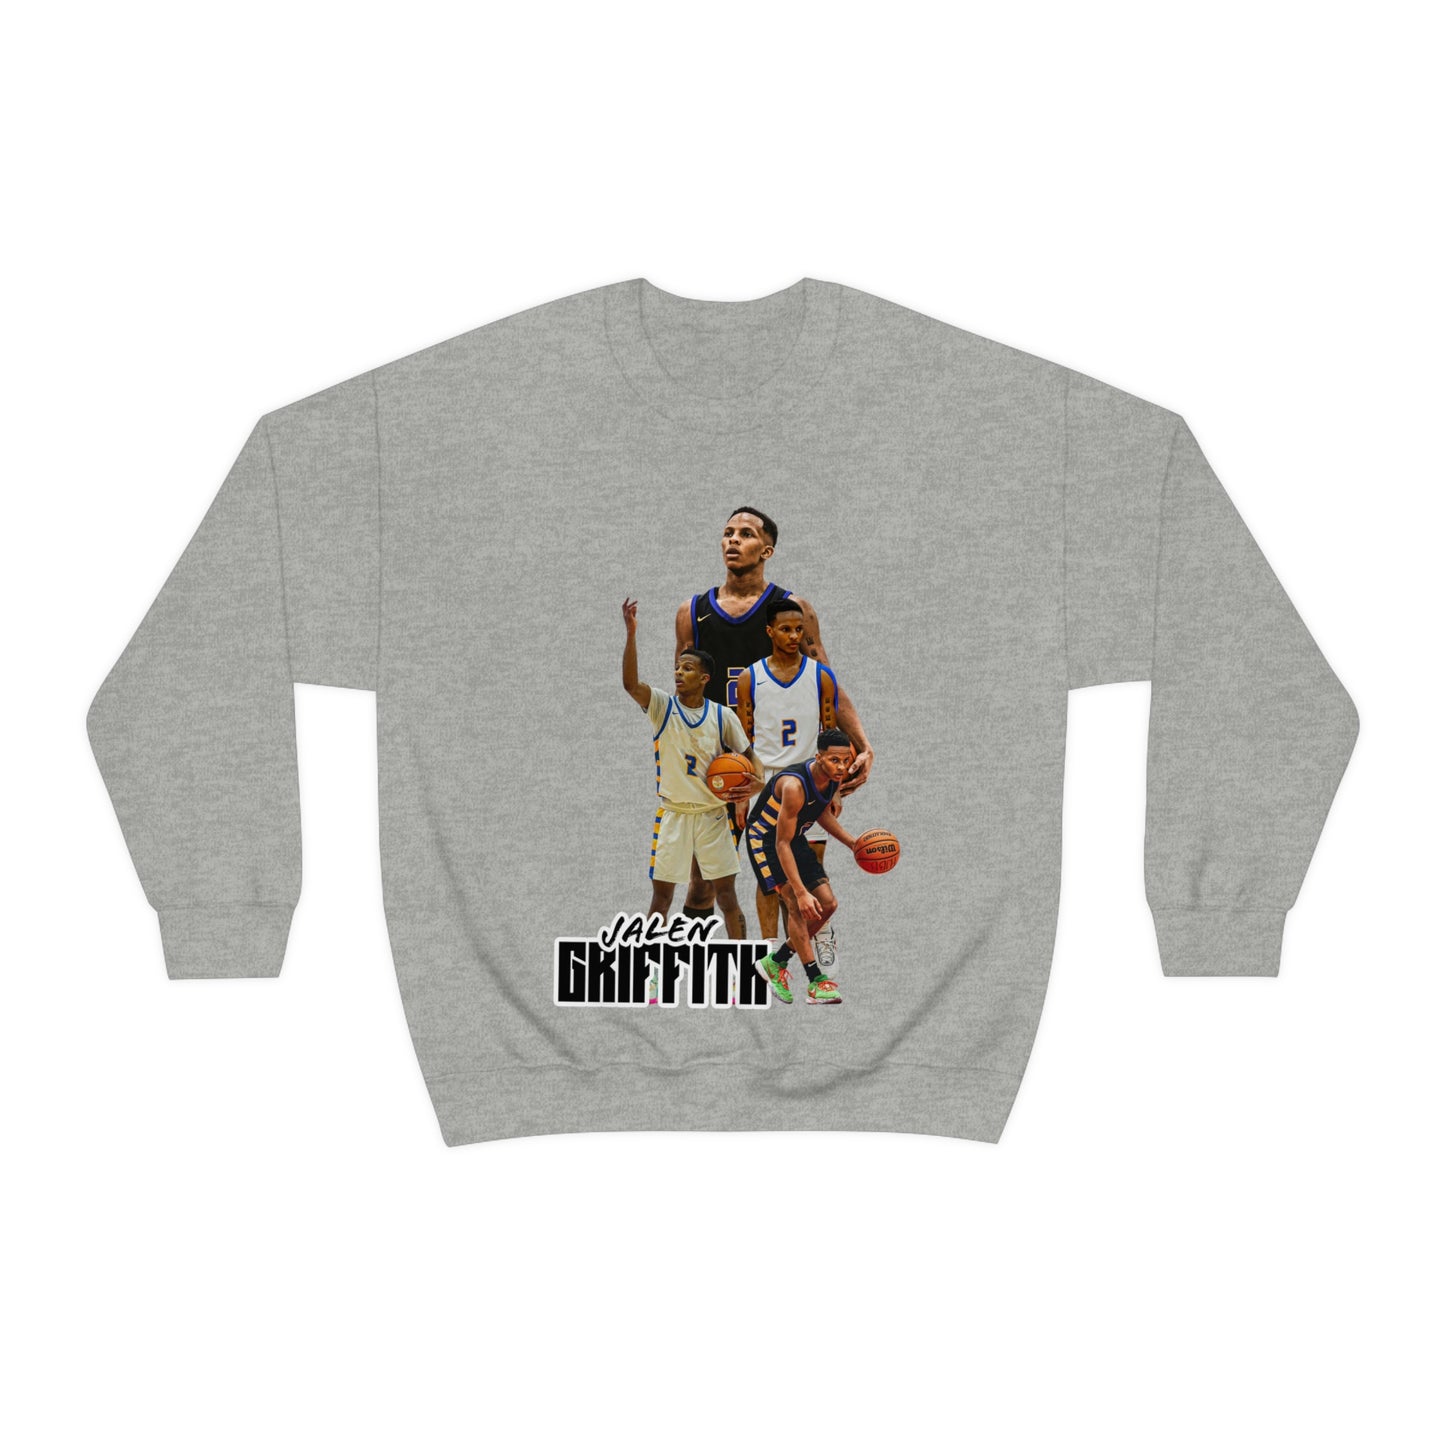 Jalen Griffith: Kill Anything With Silence Crewneck